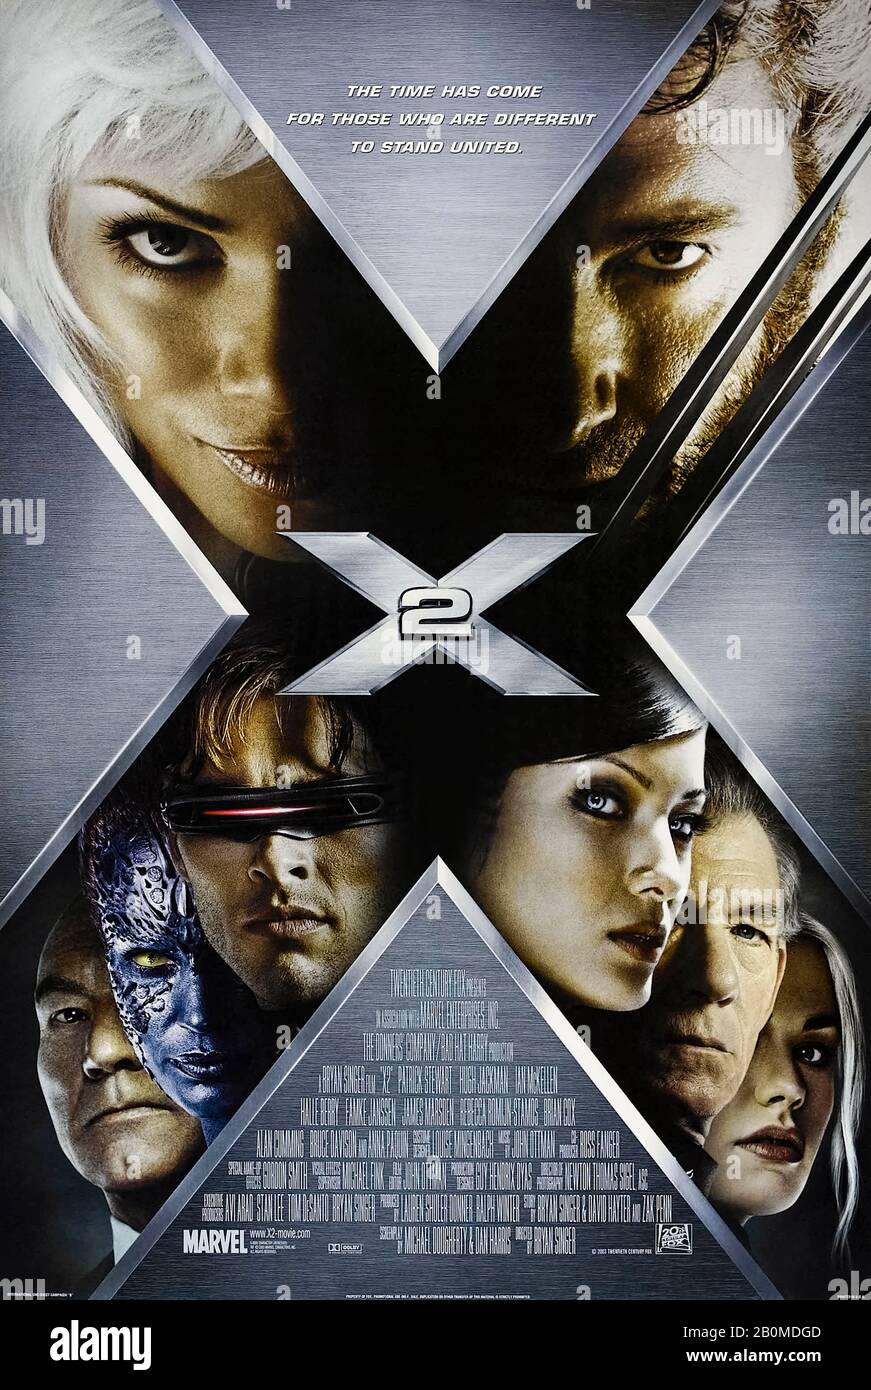 X2 (X-Men 2) (2003) directed by Bryan Singer and starring Patrick Stewart, Hugh Jackman, Halle Berry and Ian McKellen. The second installment of the X-men film series finds them teaming up with Magneto's Brotherhood to prevent a mutant genocide. Stock Photo